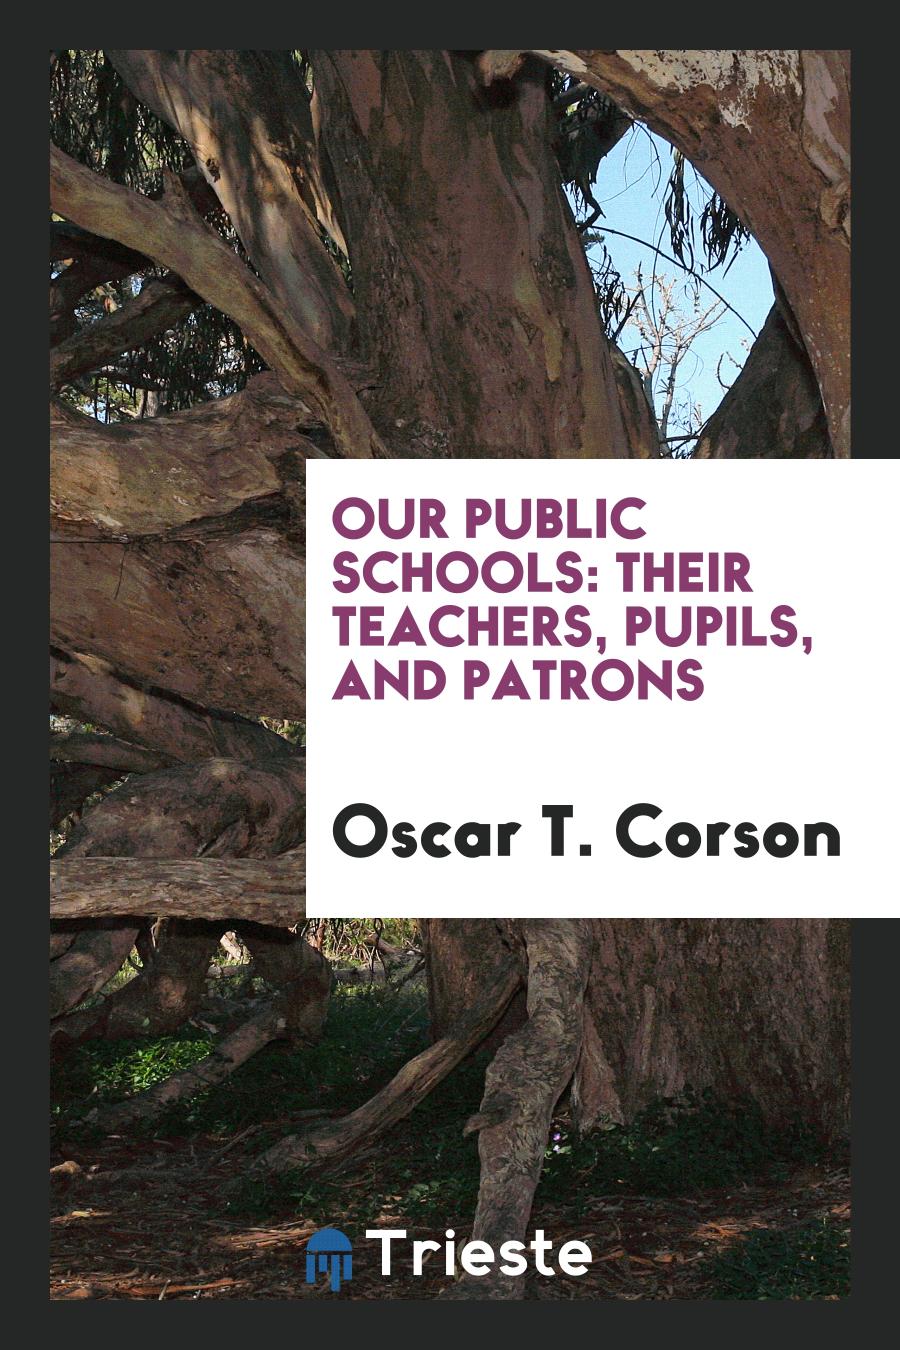 Our Public Schools: Their Teachers, Pupils, and Patrons